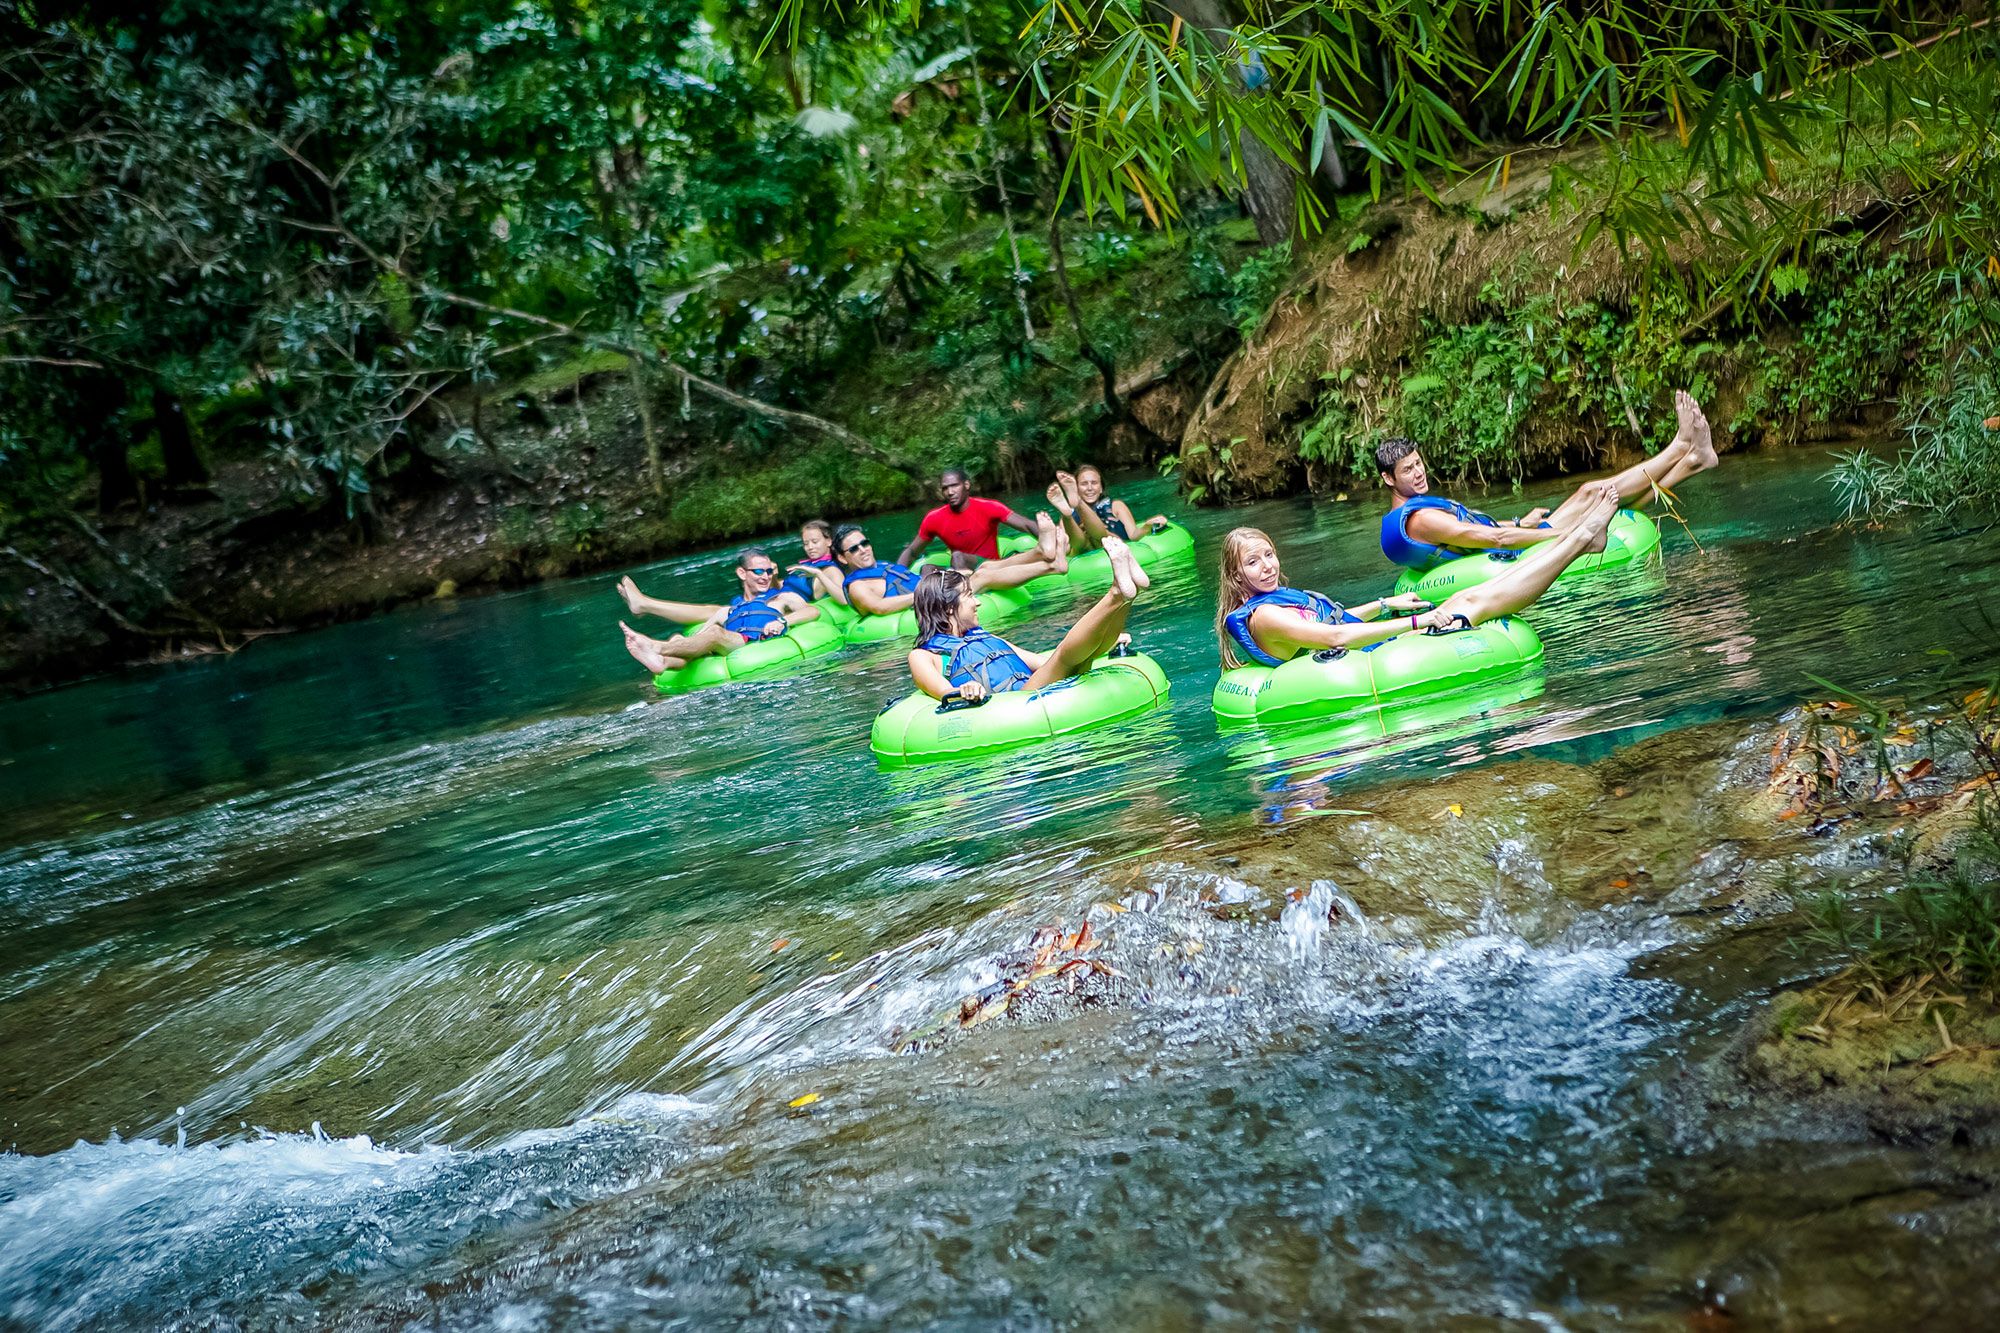 excursions tours and activities